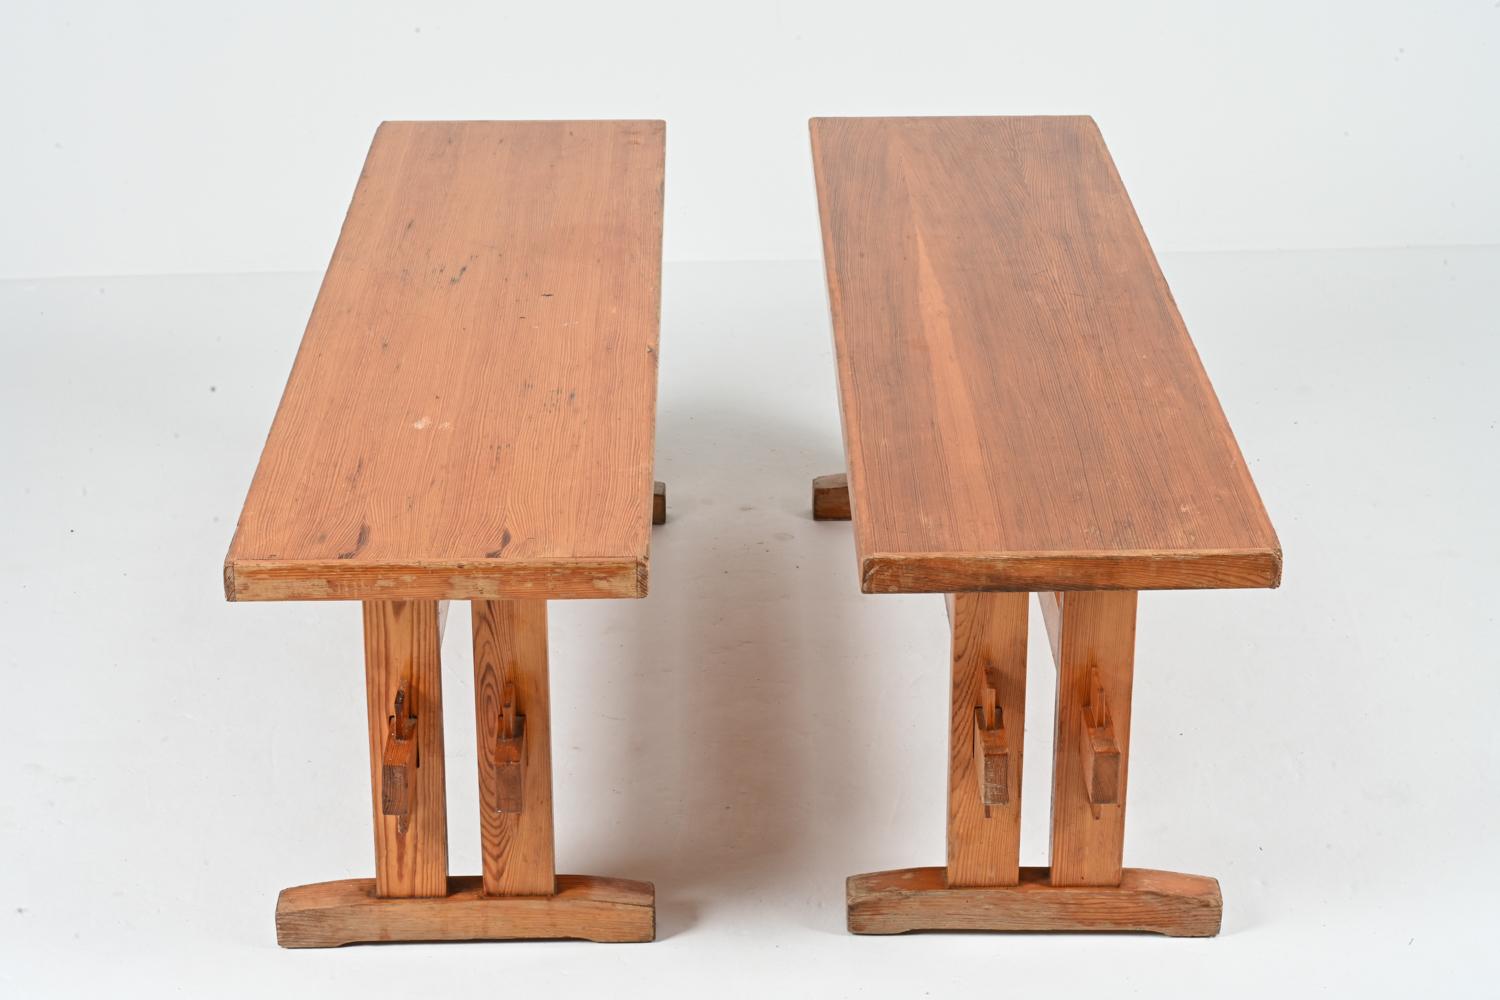 Pair of Solid Pine Benches Attributed to Sven Larsson, c. 1970's For Sale 15